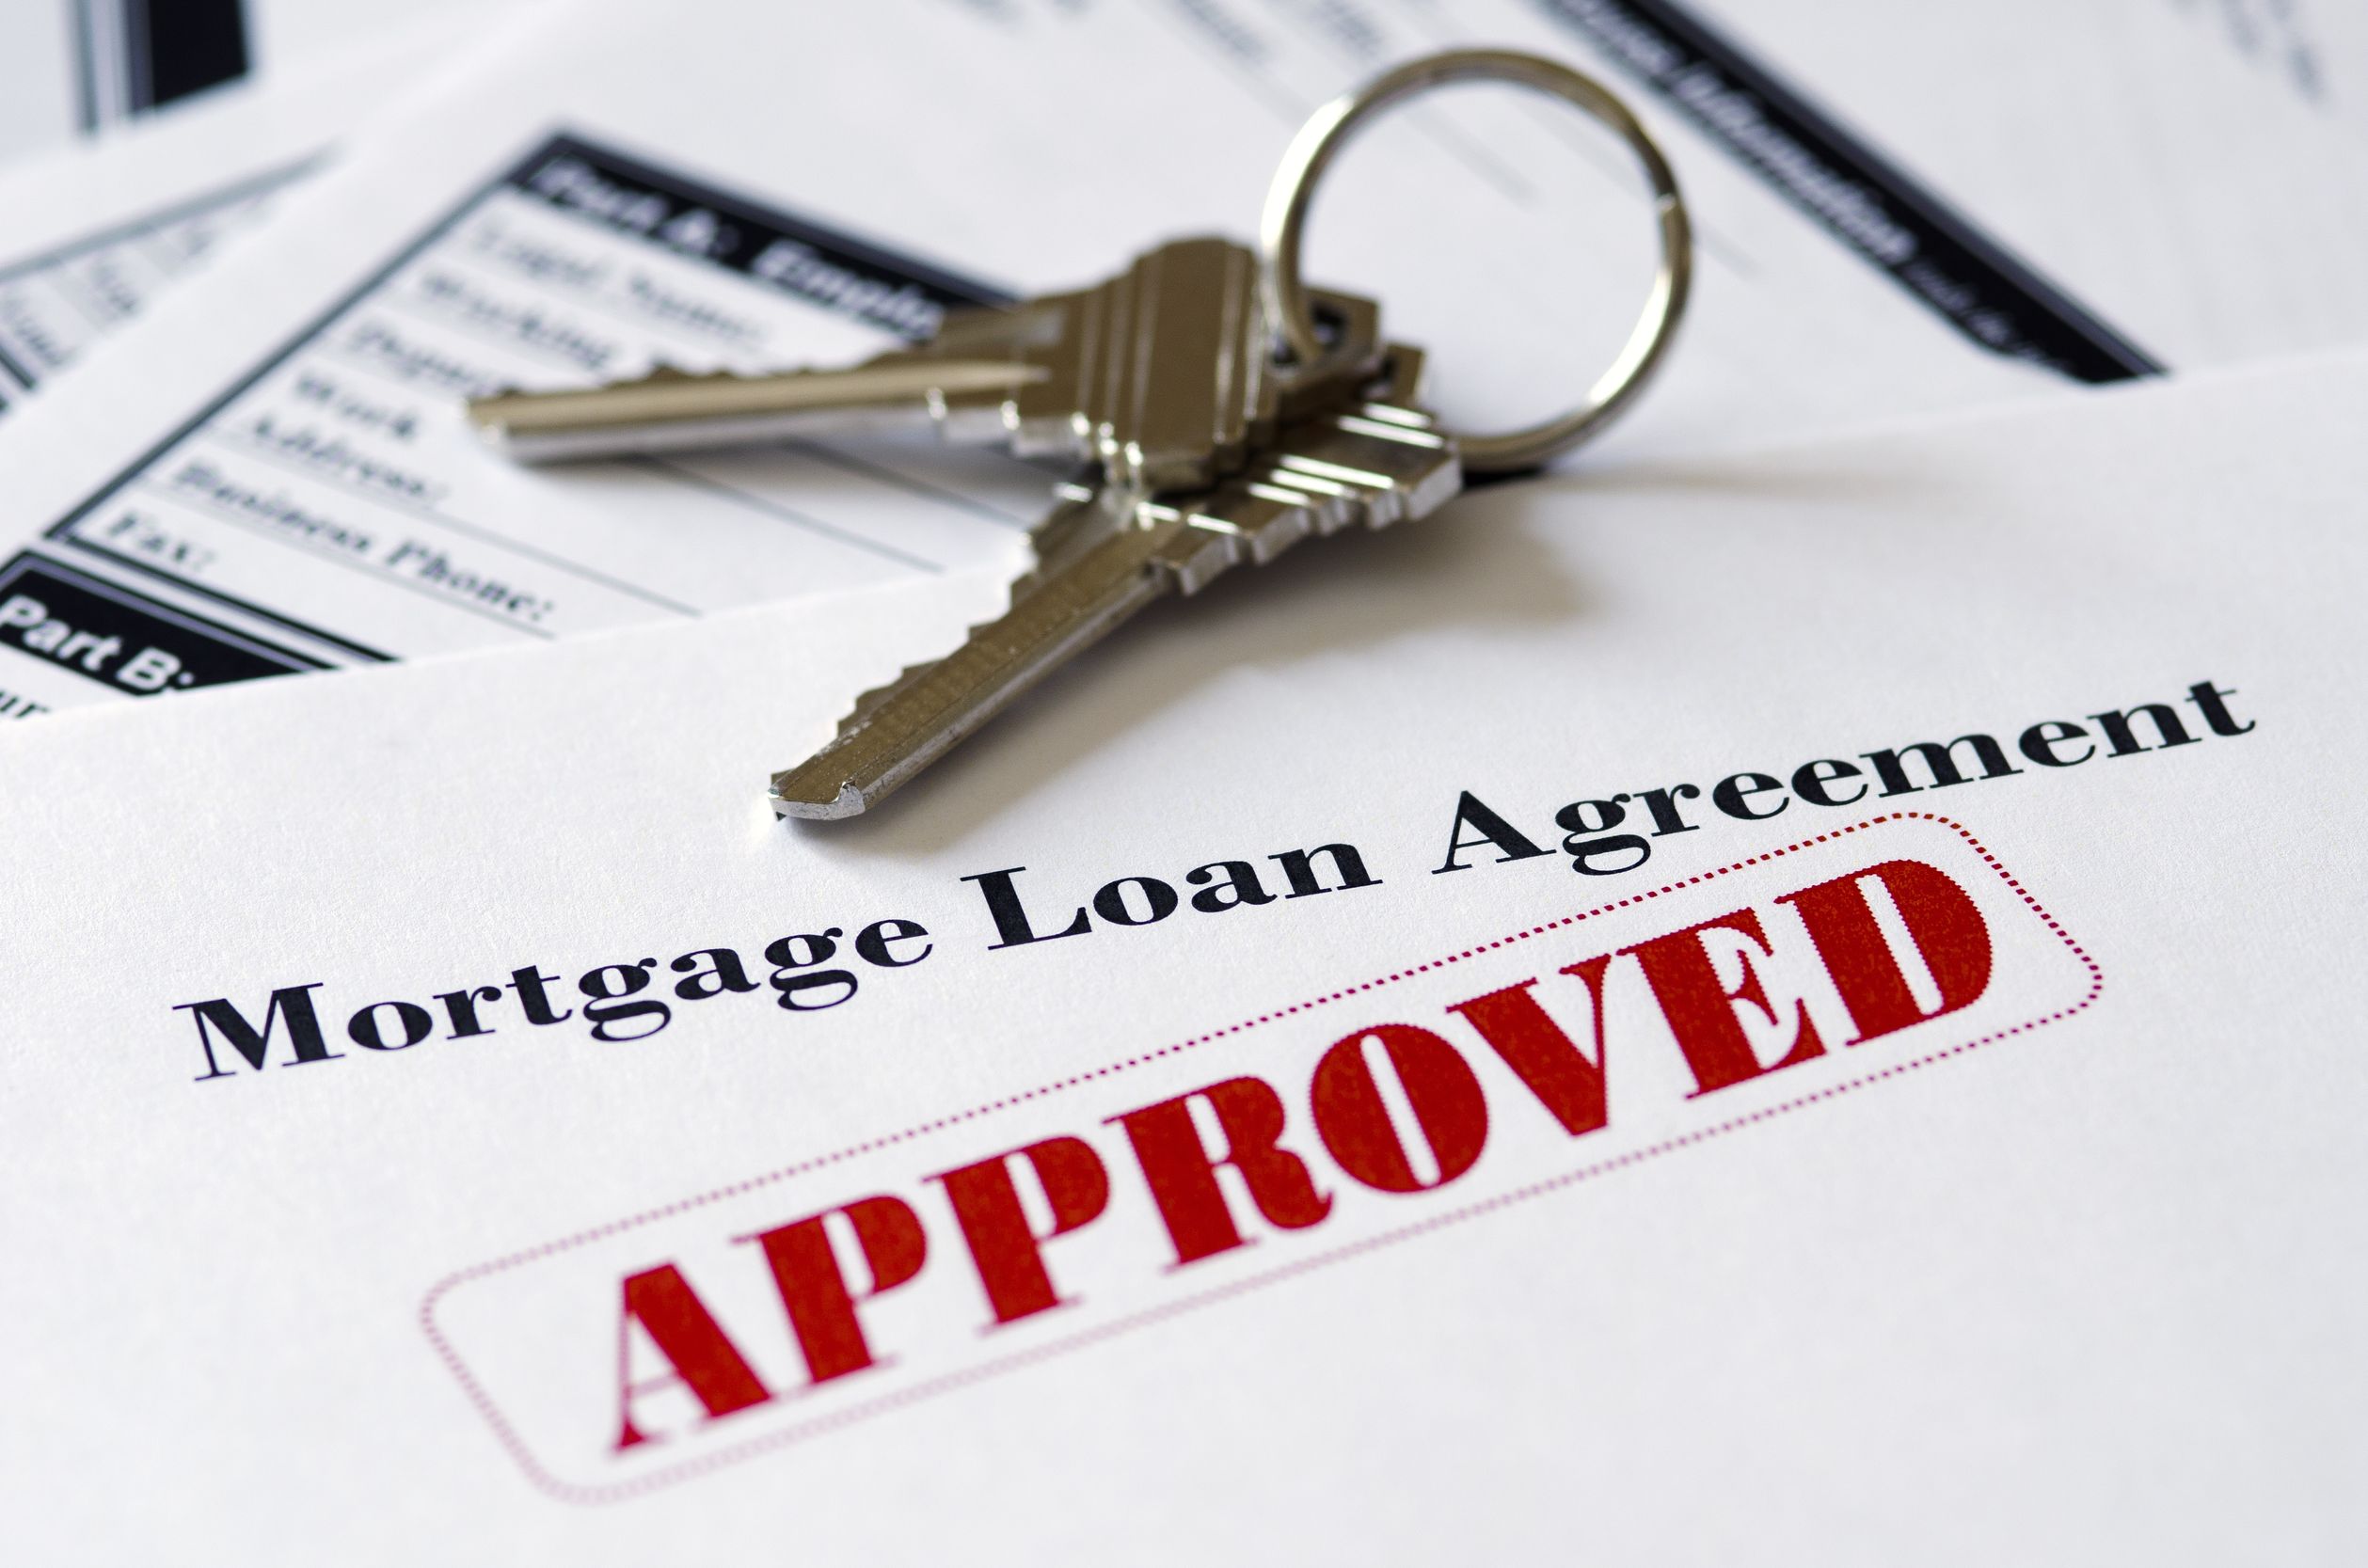 5 Tips to Get Mortgage Approval without Hassles